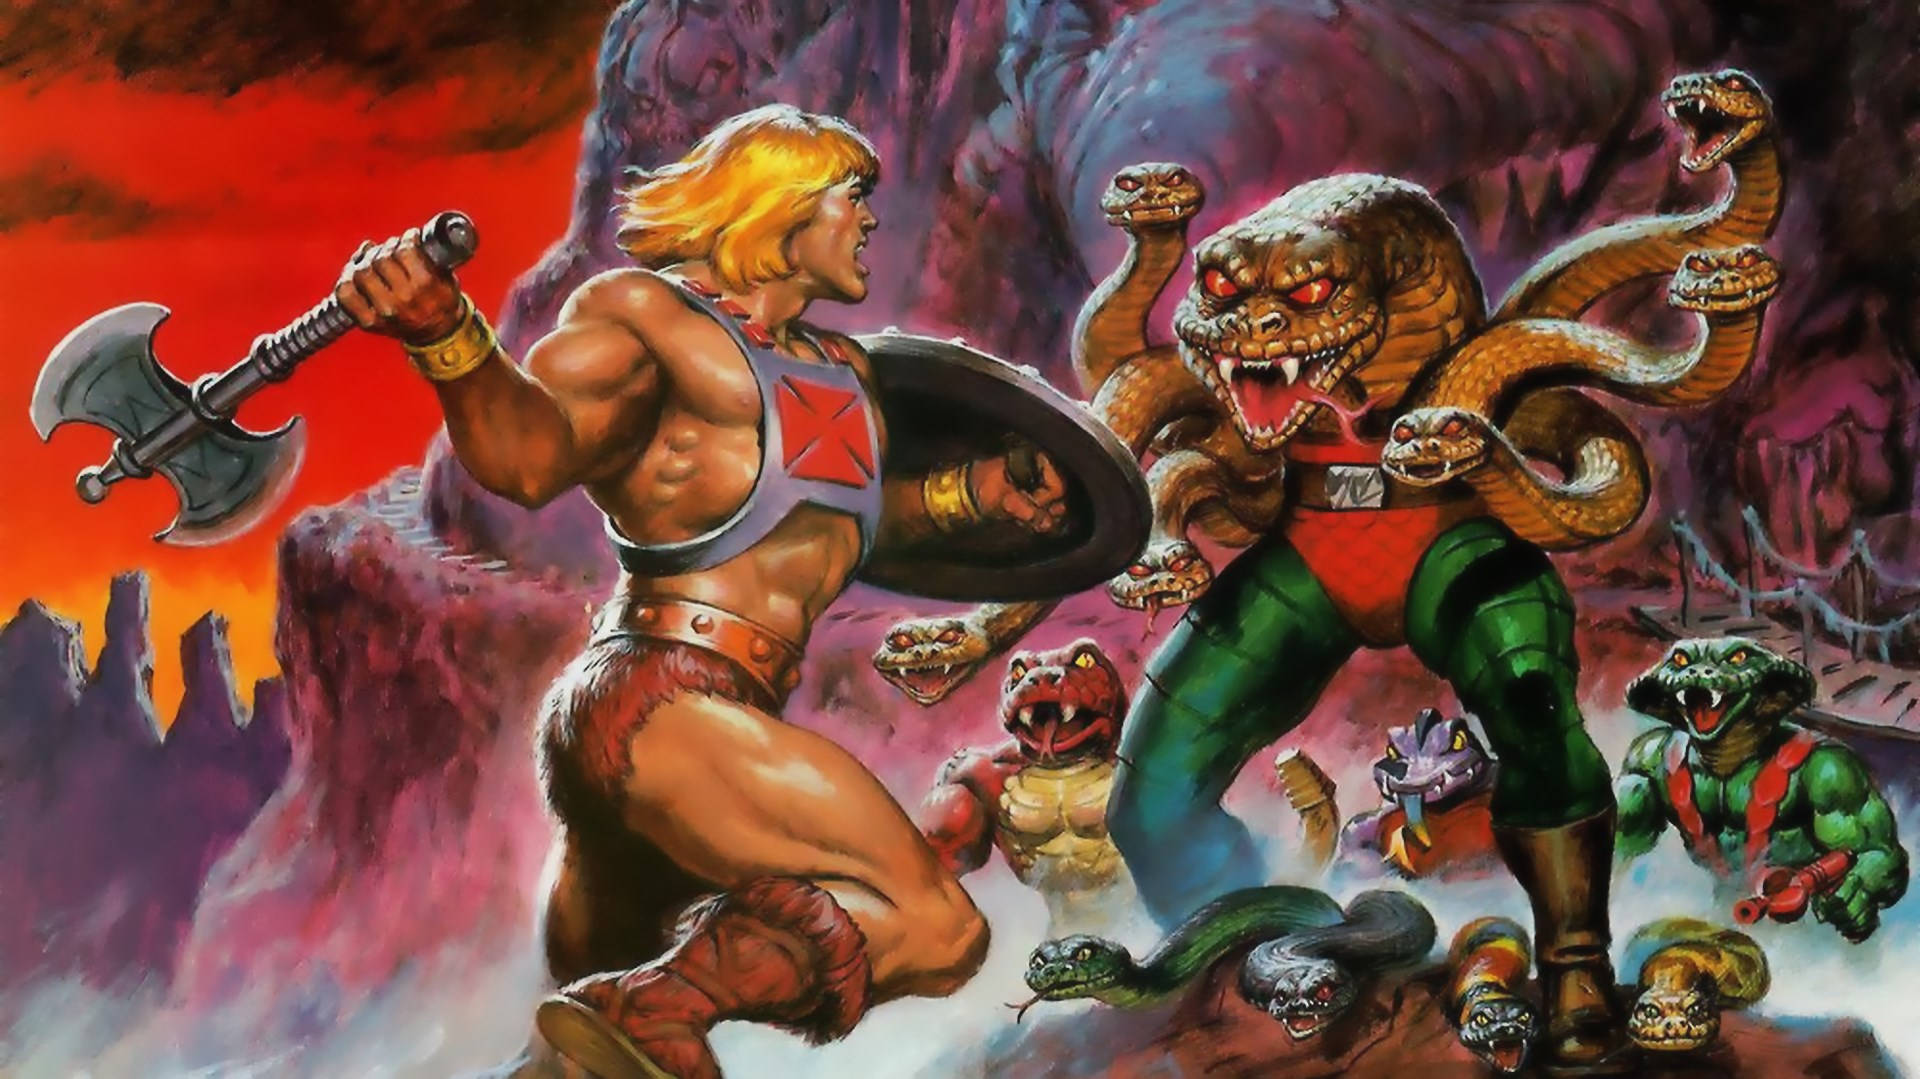 He-man And The Masters Of The Universe Vs The Snakemen Wallpaper